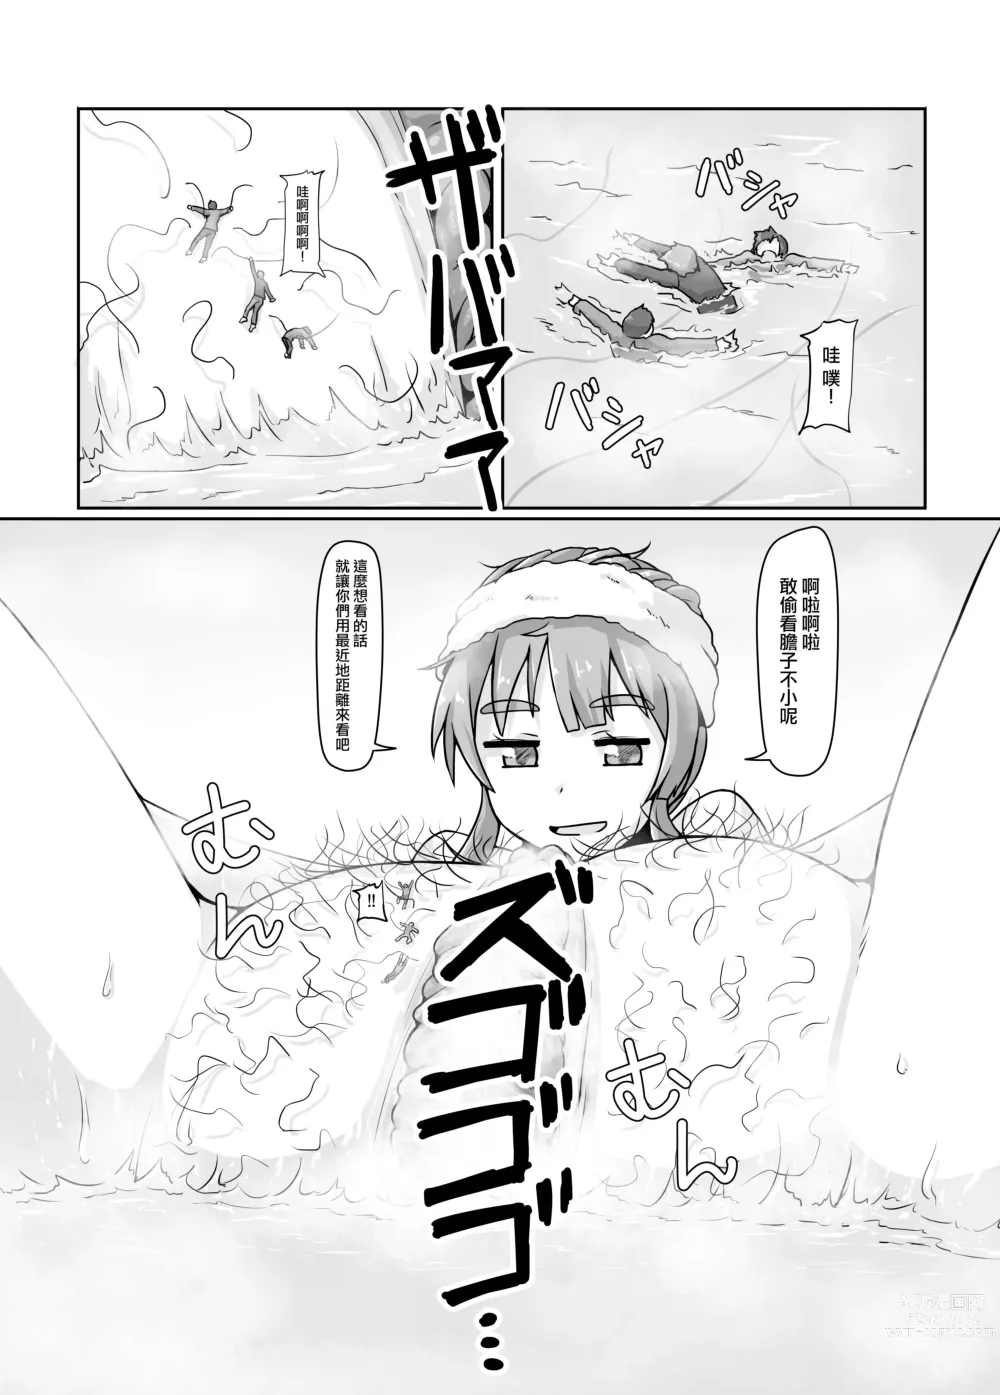 Page 12 of doujinshi 小小人類就由我來衰退